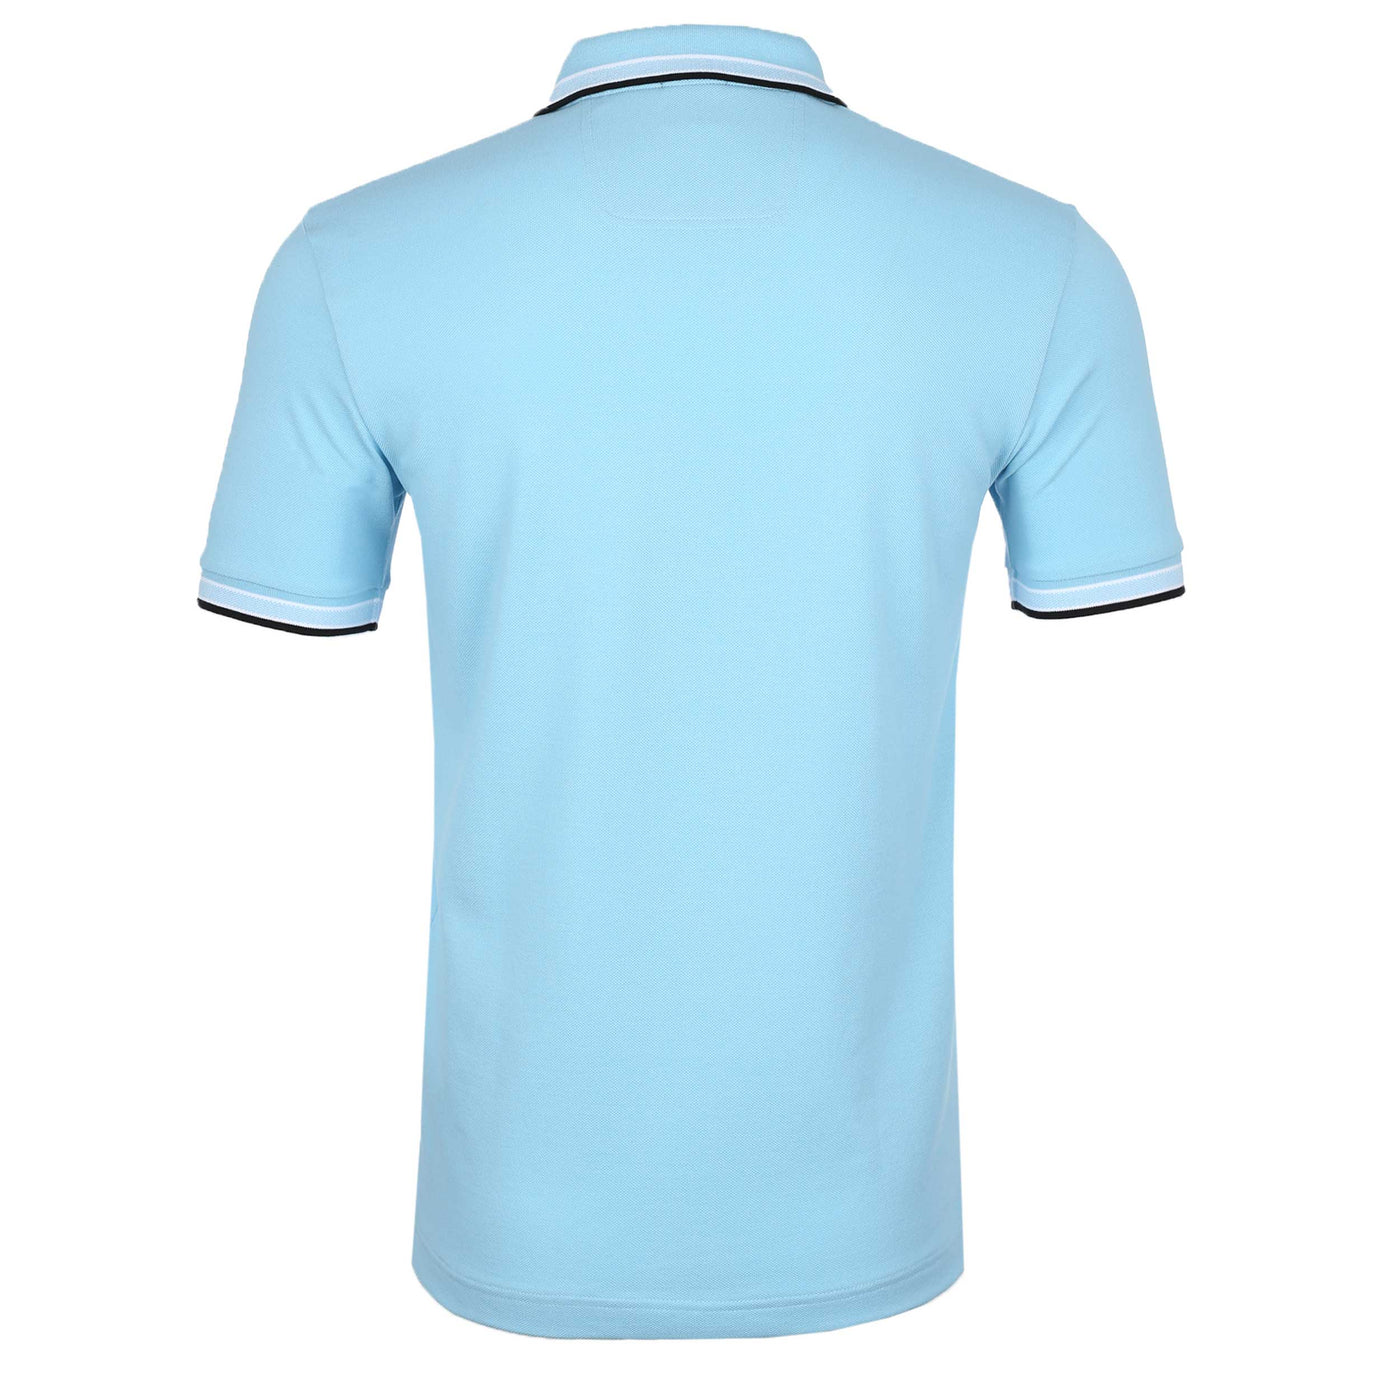 BOSS Paddy Polo Shirt in Sky Blue